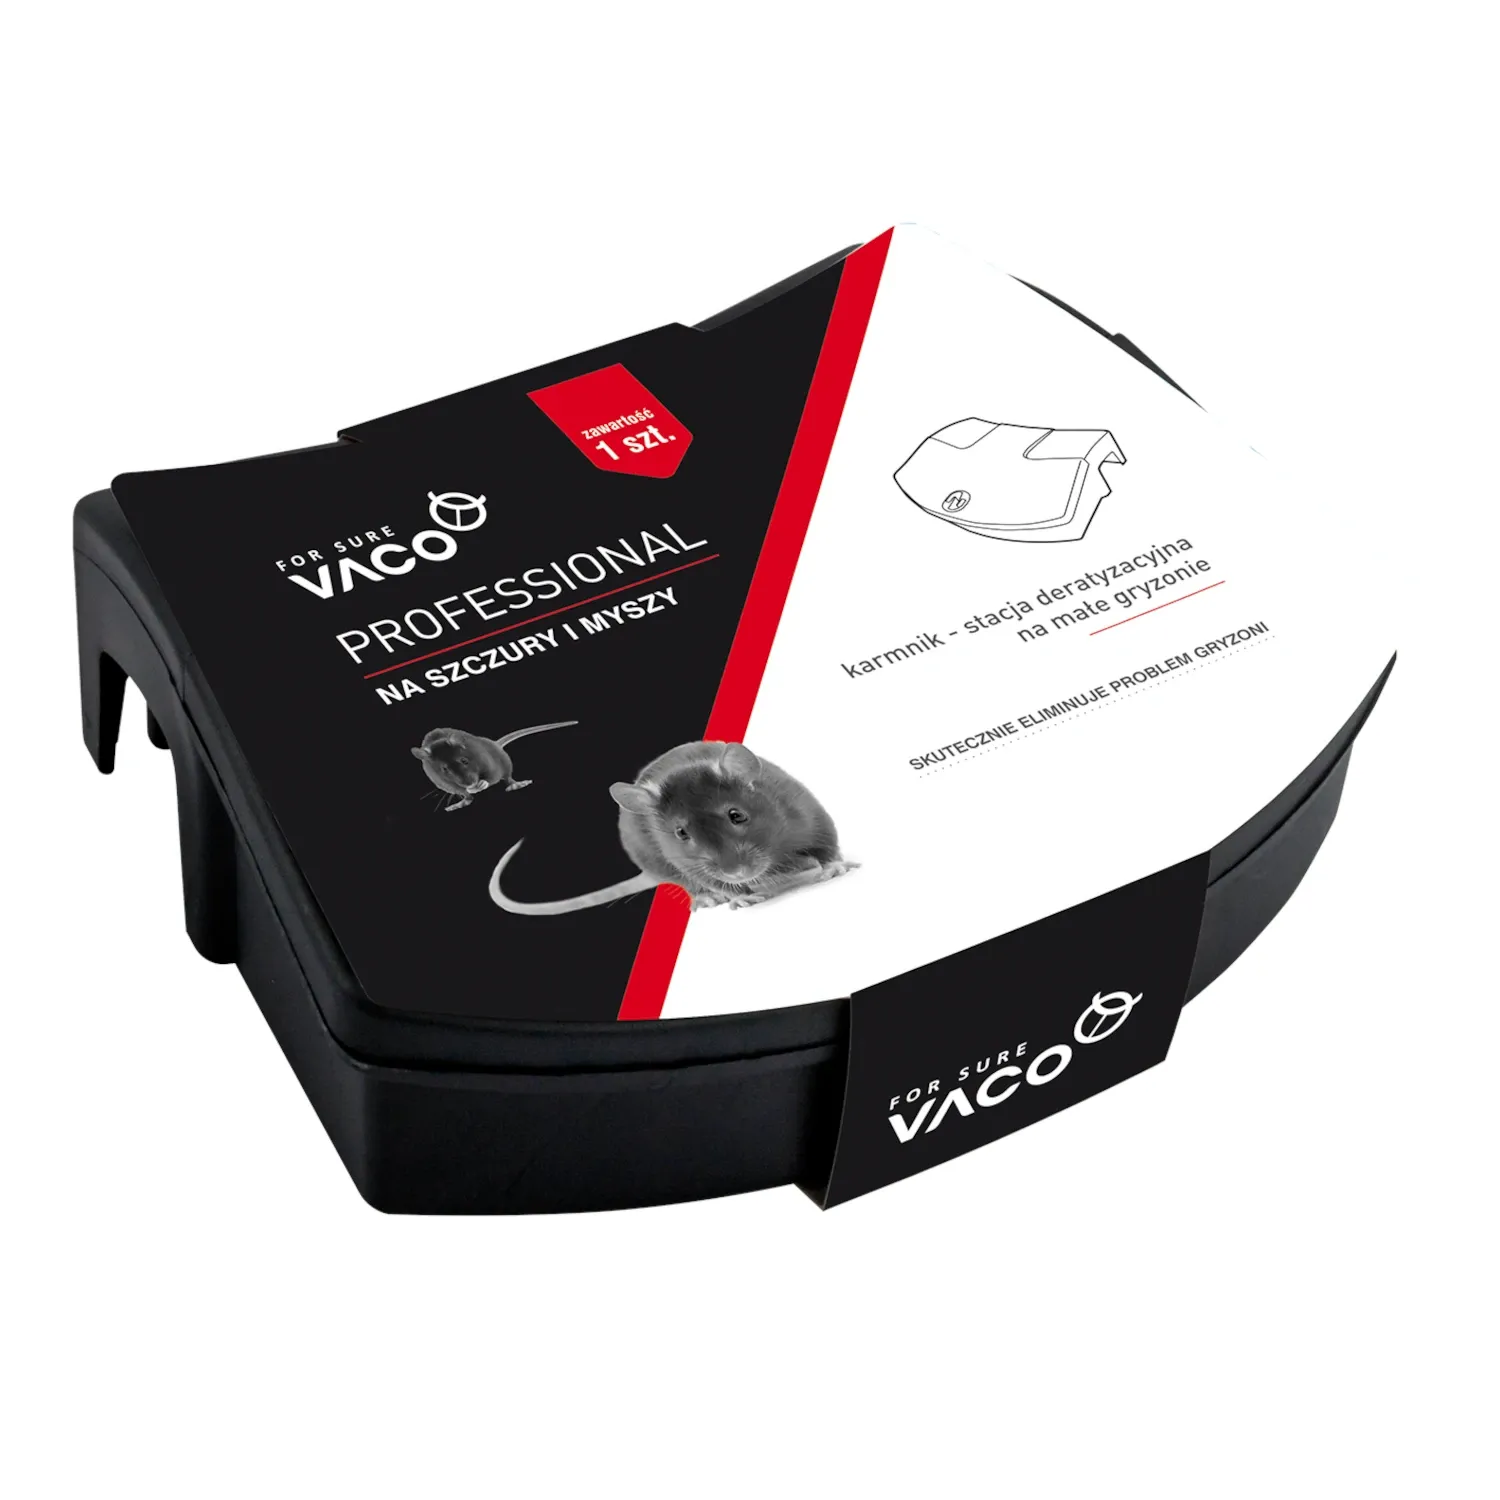 VACO PROFESSIONAL FEEDER – DERATATION STATION FOR SMALL RODENTS (MICE)